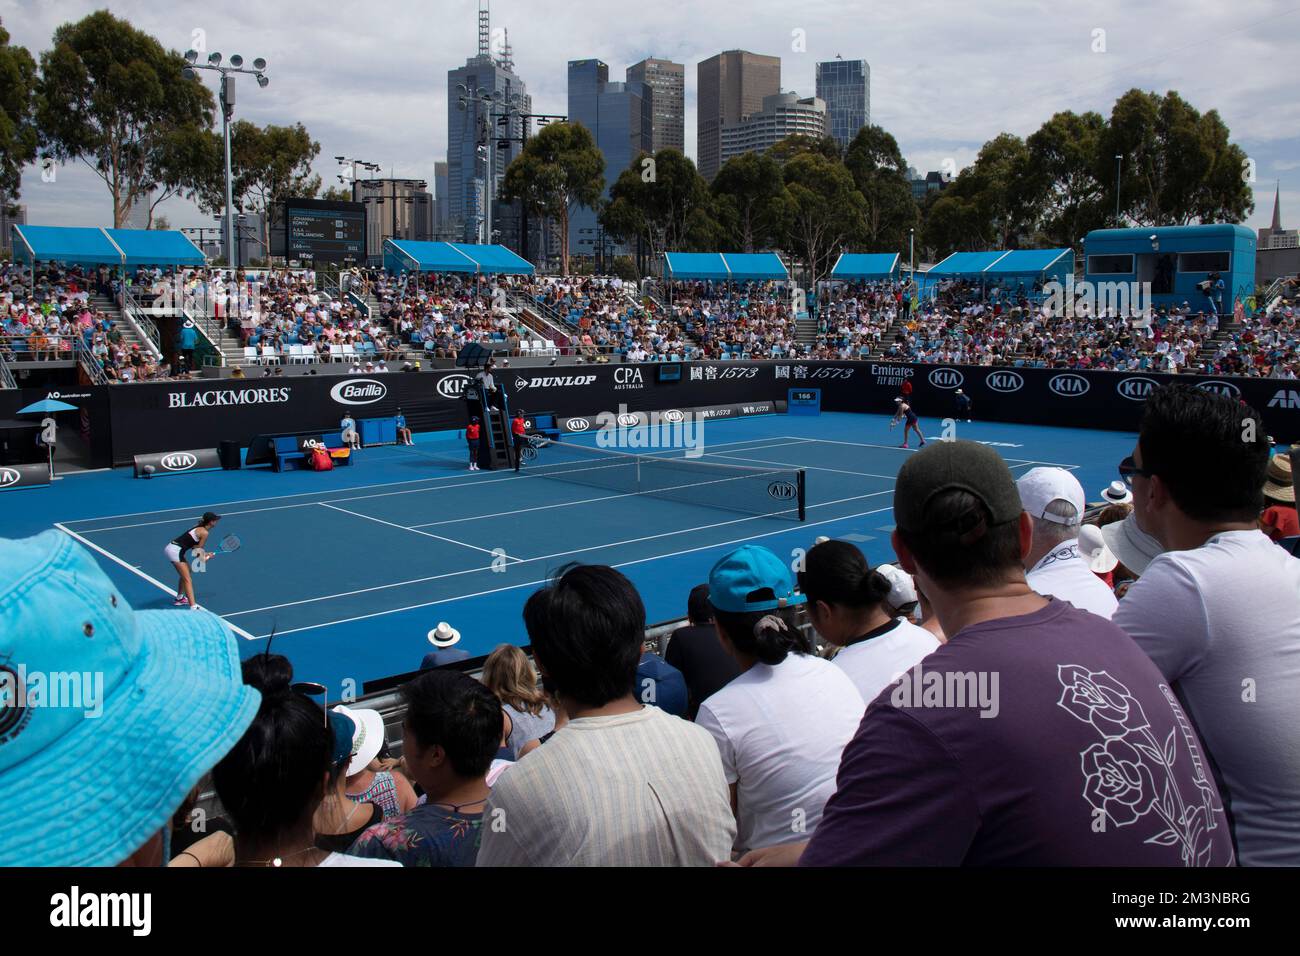 No 3 Court at Melbourne Grand Slam Tennis Tournament in January 2019 Stock Photo